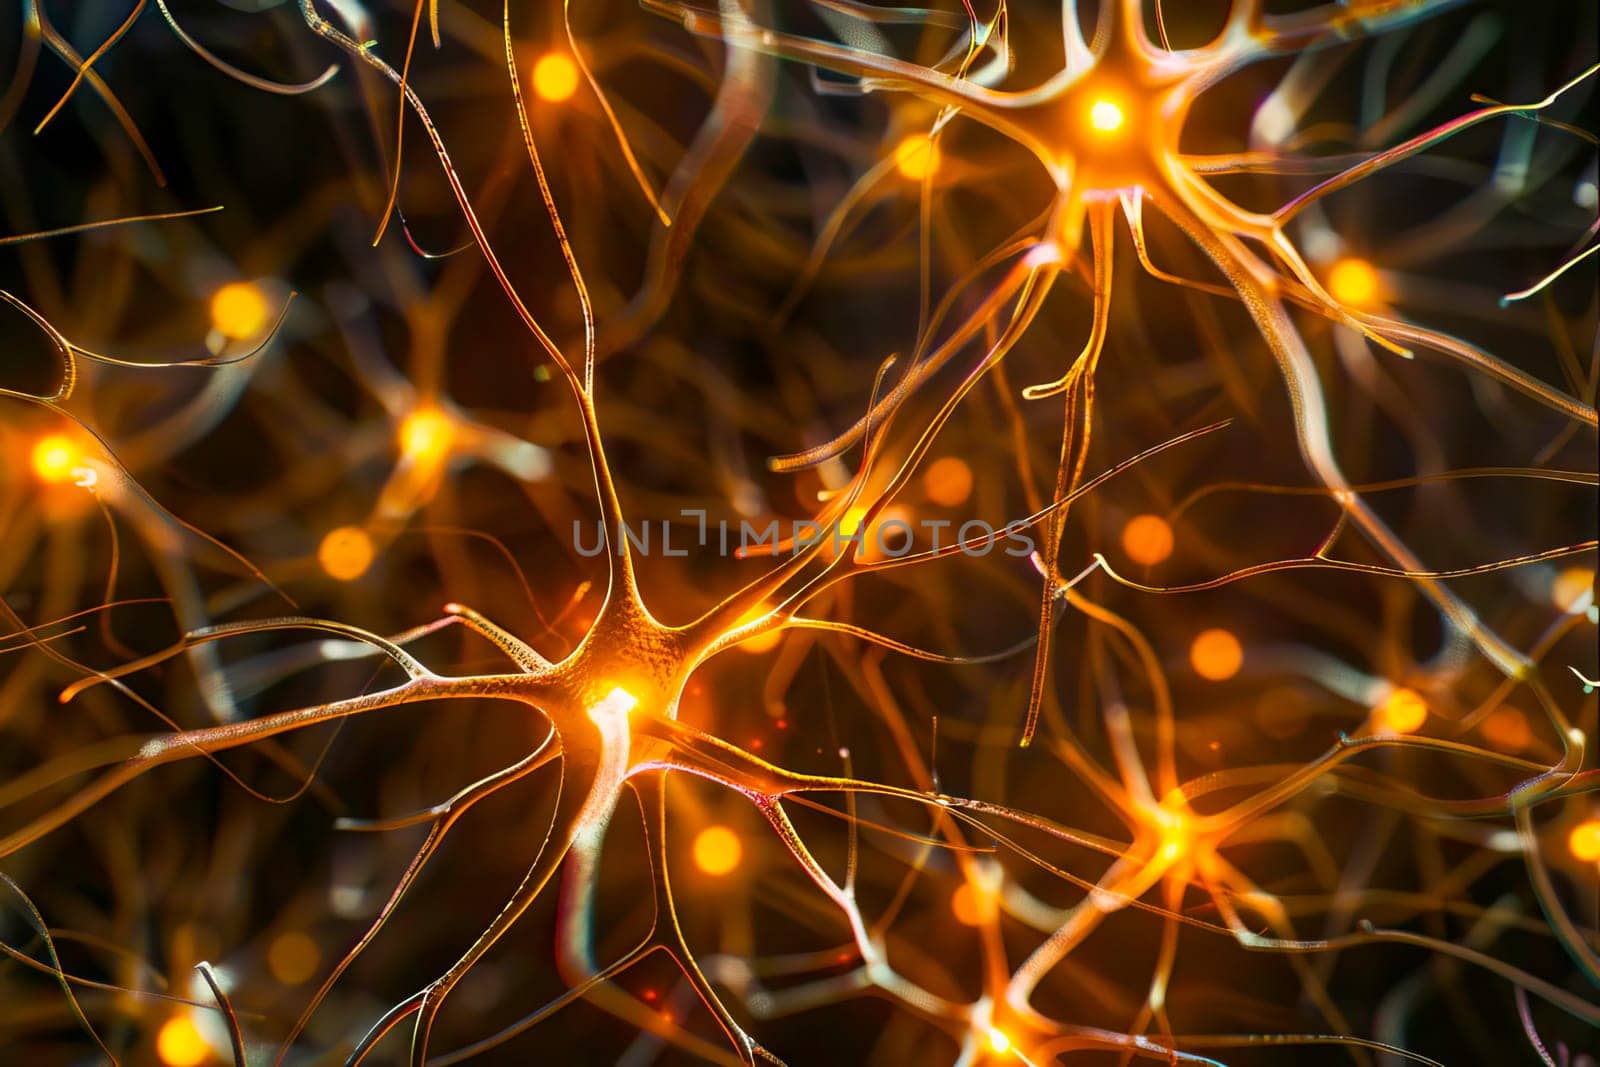 Neurons interconnected with bright signals representing brain activity.